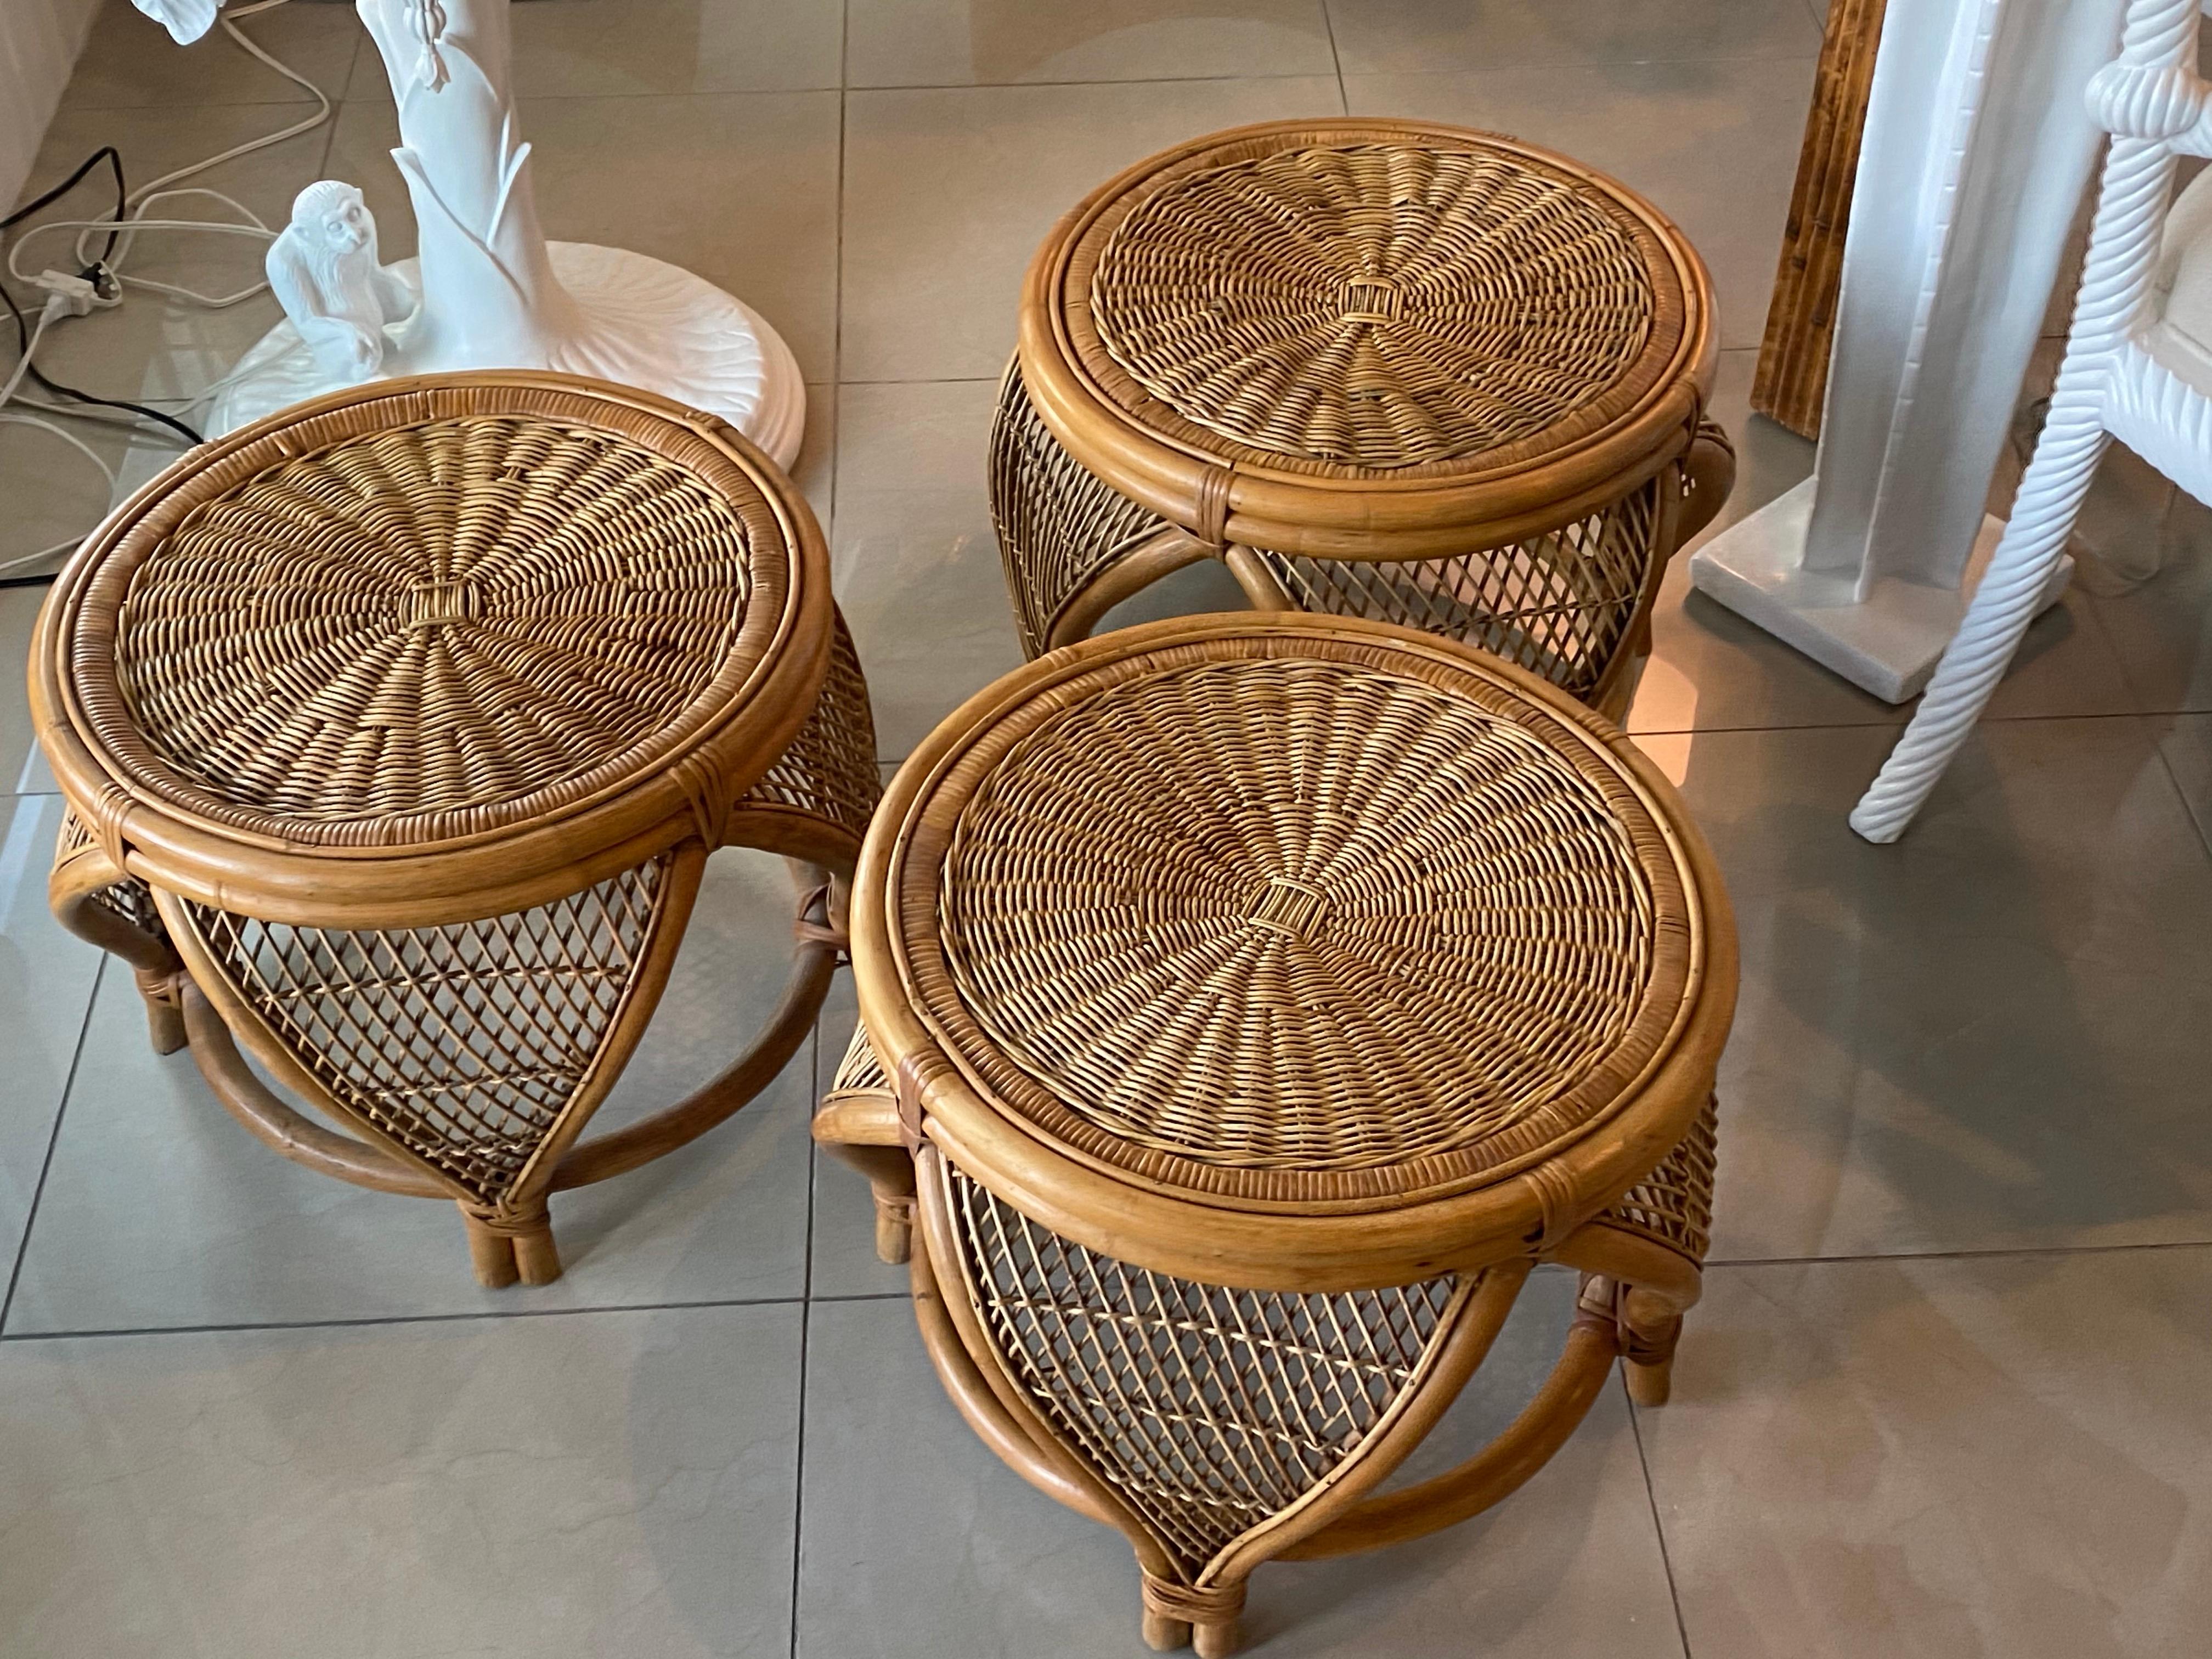 Vintage Set of 3 Rattan & Wicker Moroccan Stools Benches Ottomans Footstools 2